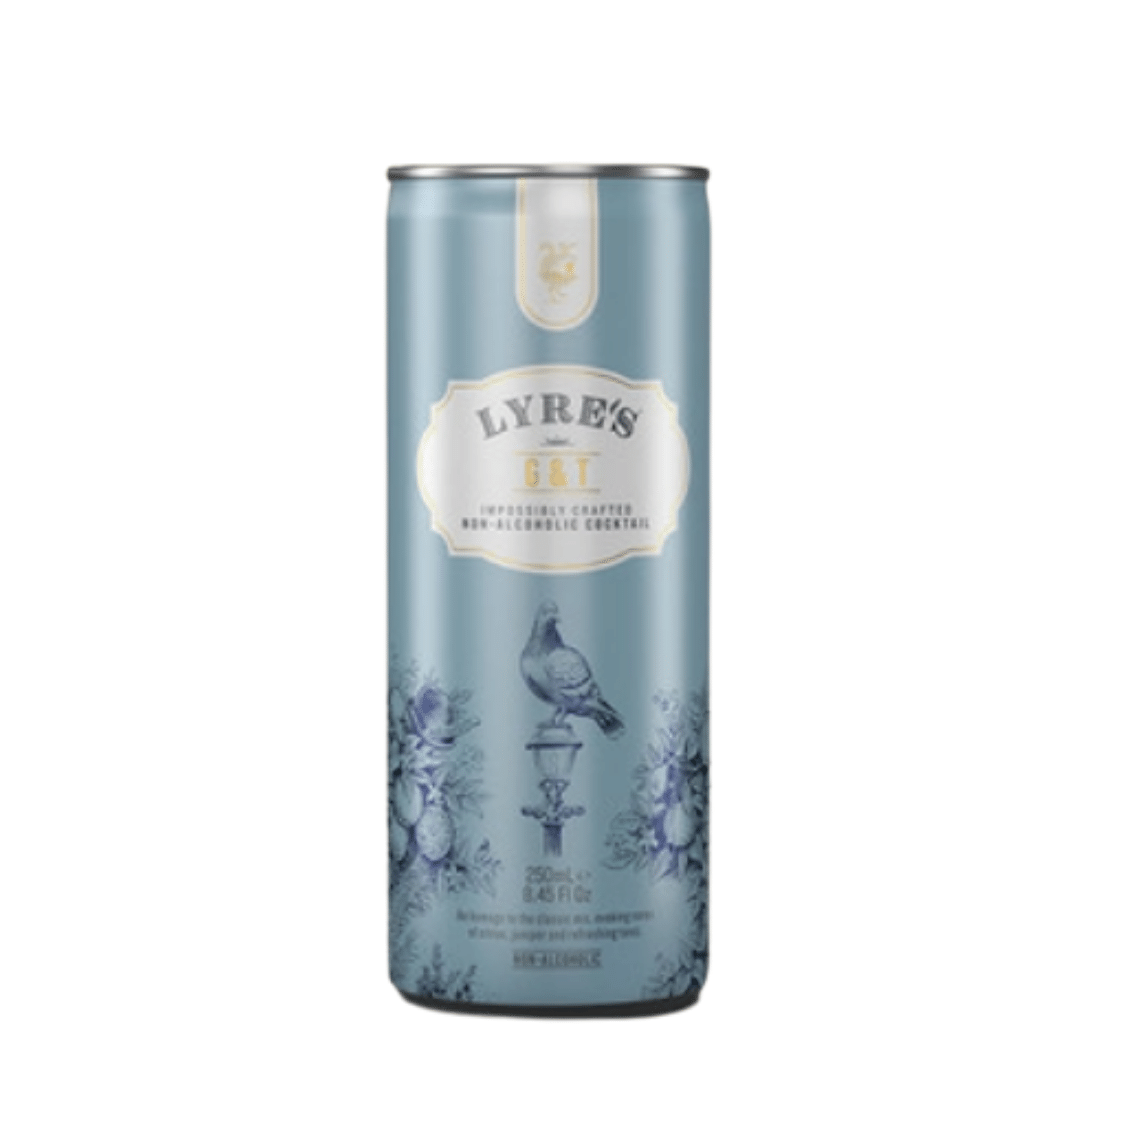 Lyre's Gin & Tonic (4 pack)